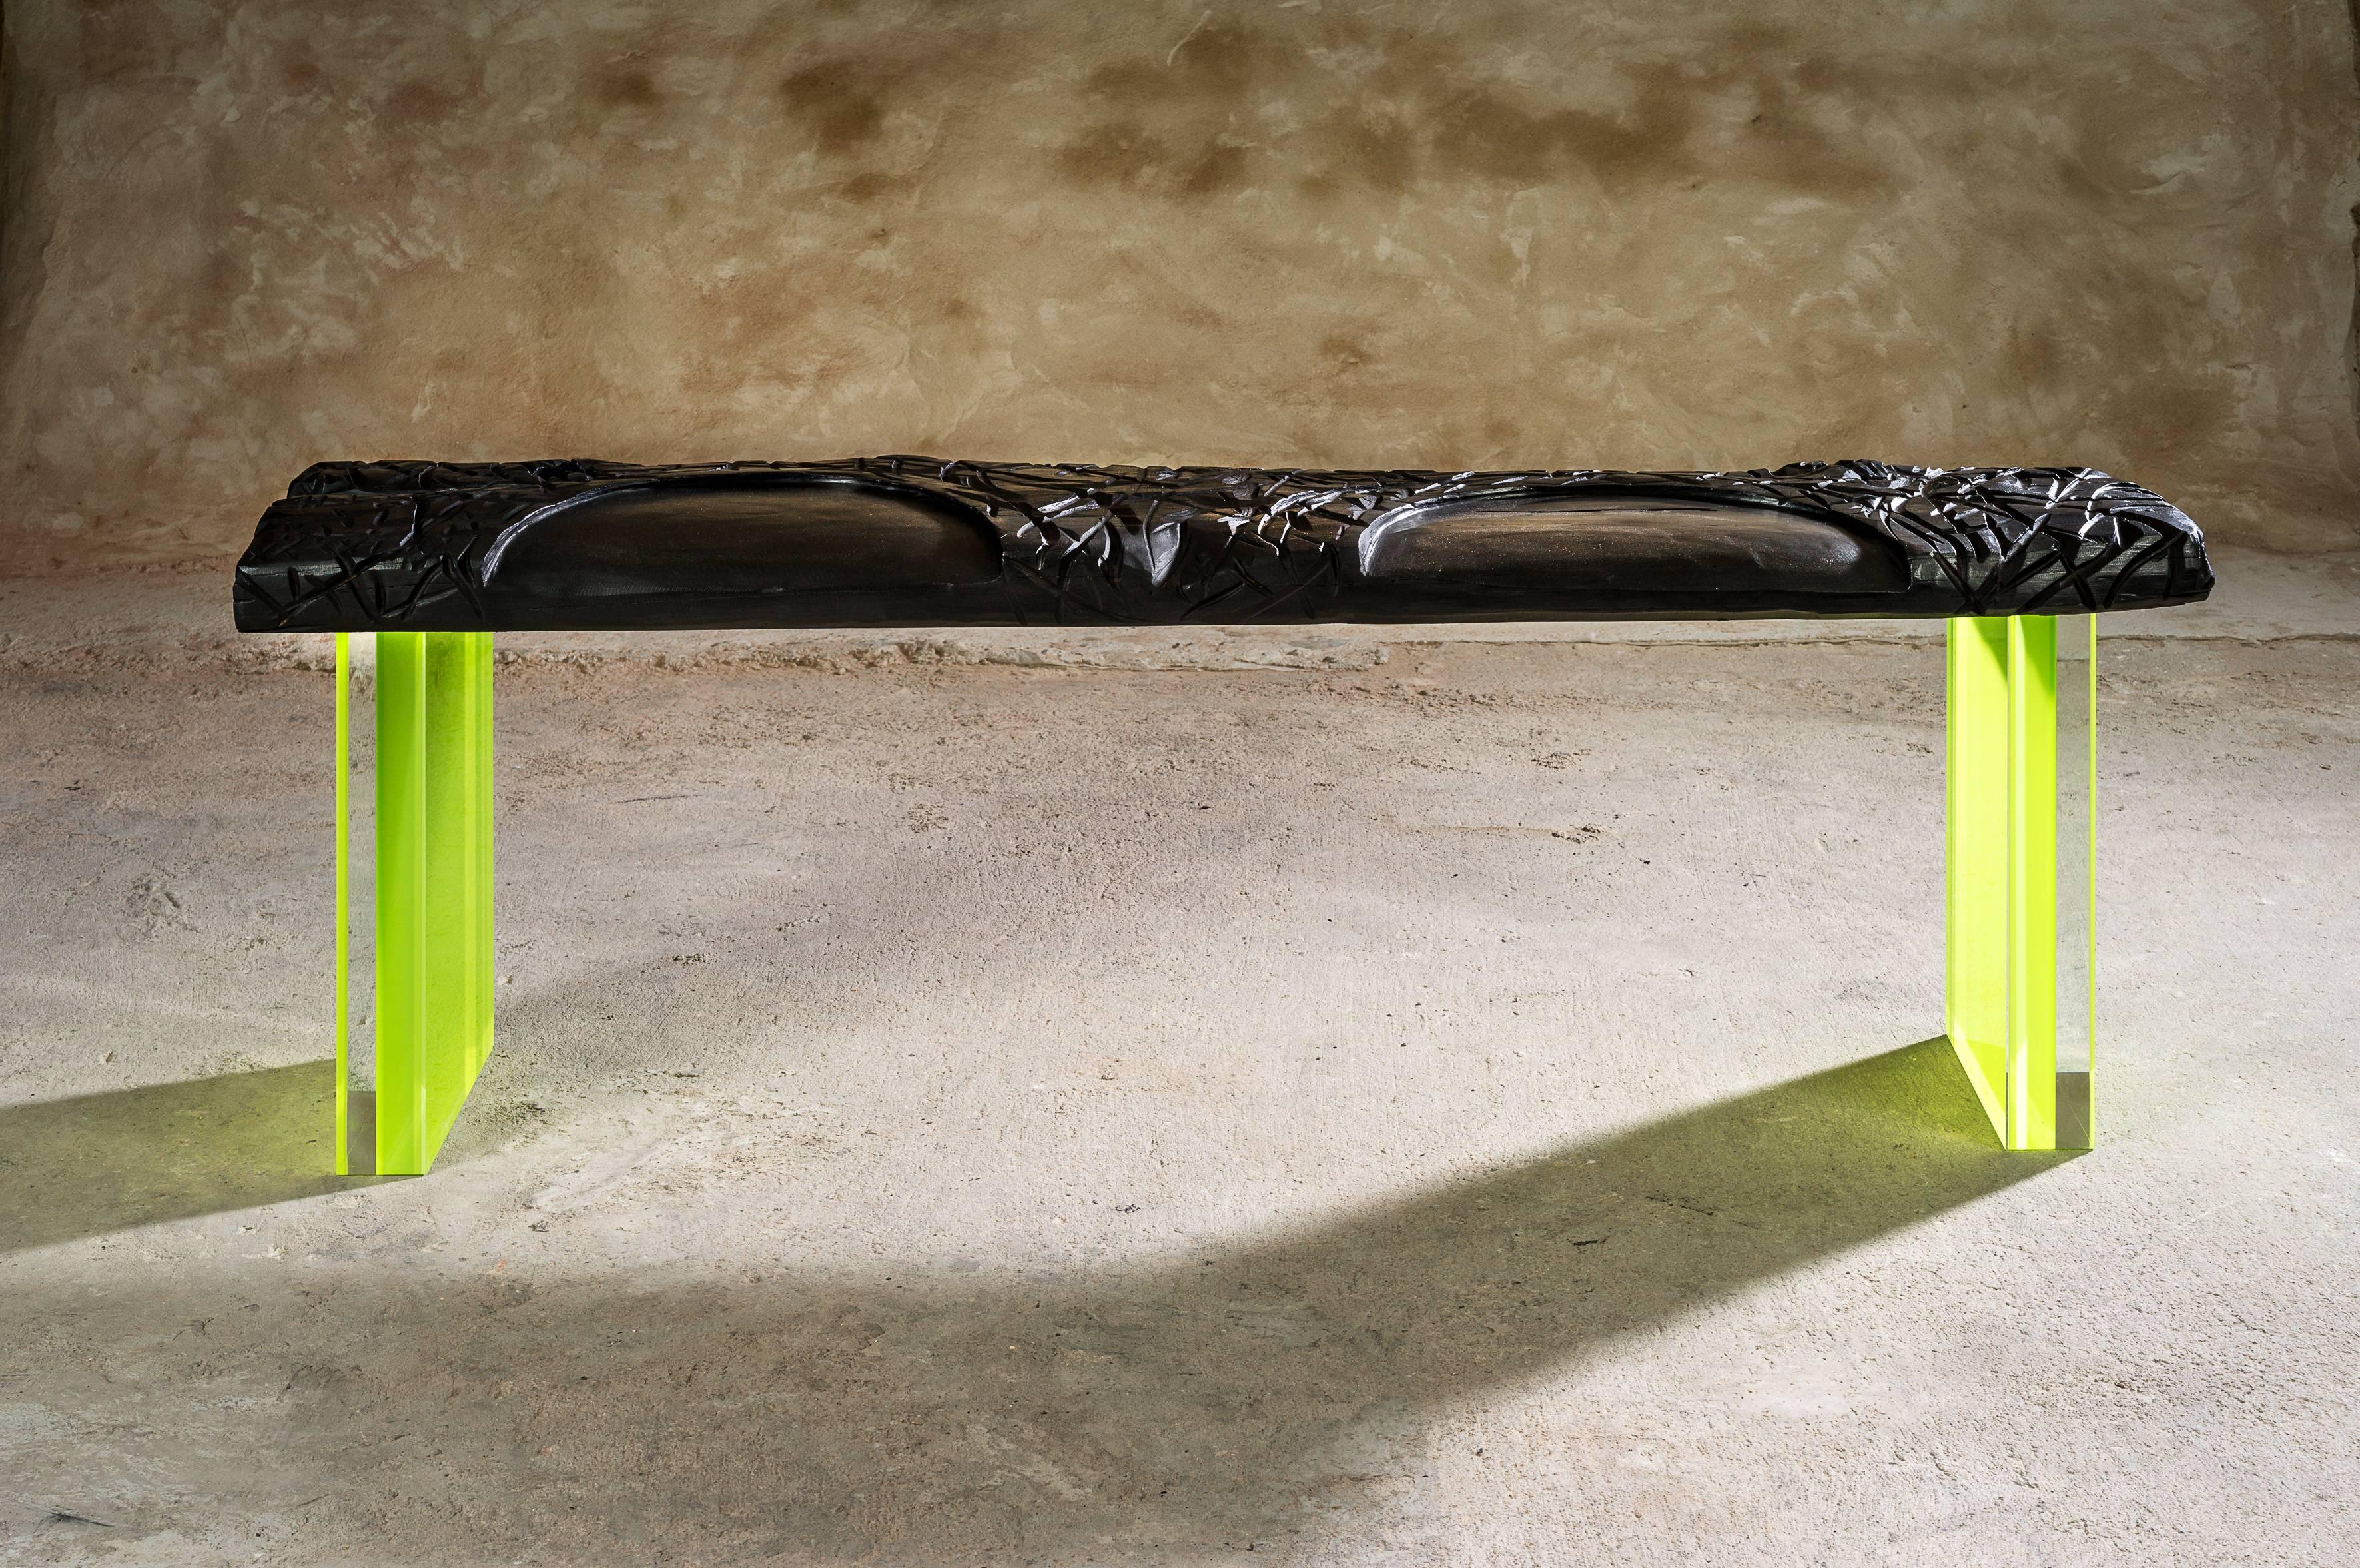 Calciné is part of Charly Bounan's new collection.
It is a unique hand-sculpted bench by Charly Bounan.

Edition: 
Unique and signed.

Dimensions: 
53 x 148 x 29 cm.

Materials: 
Sculpted wood with graphite wax.
Moulded plexiglass with